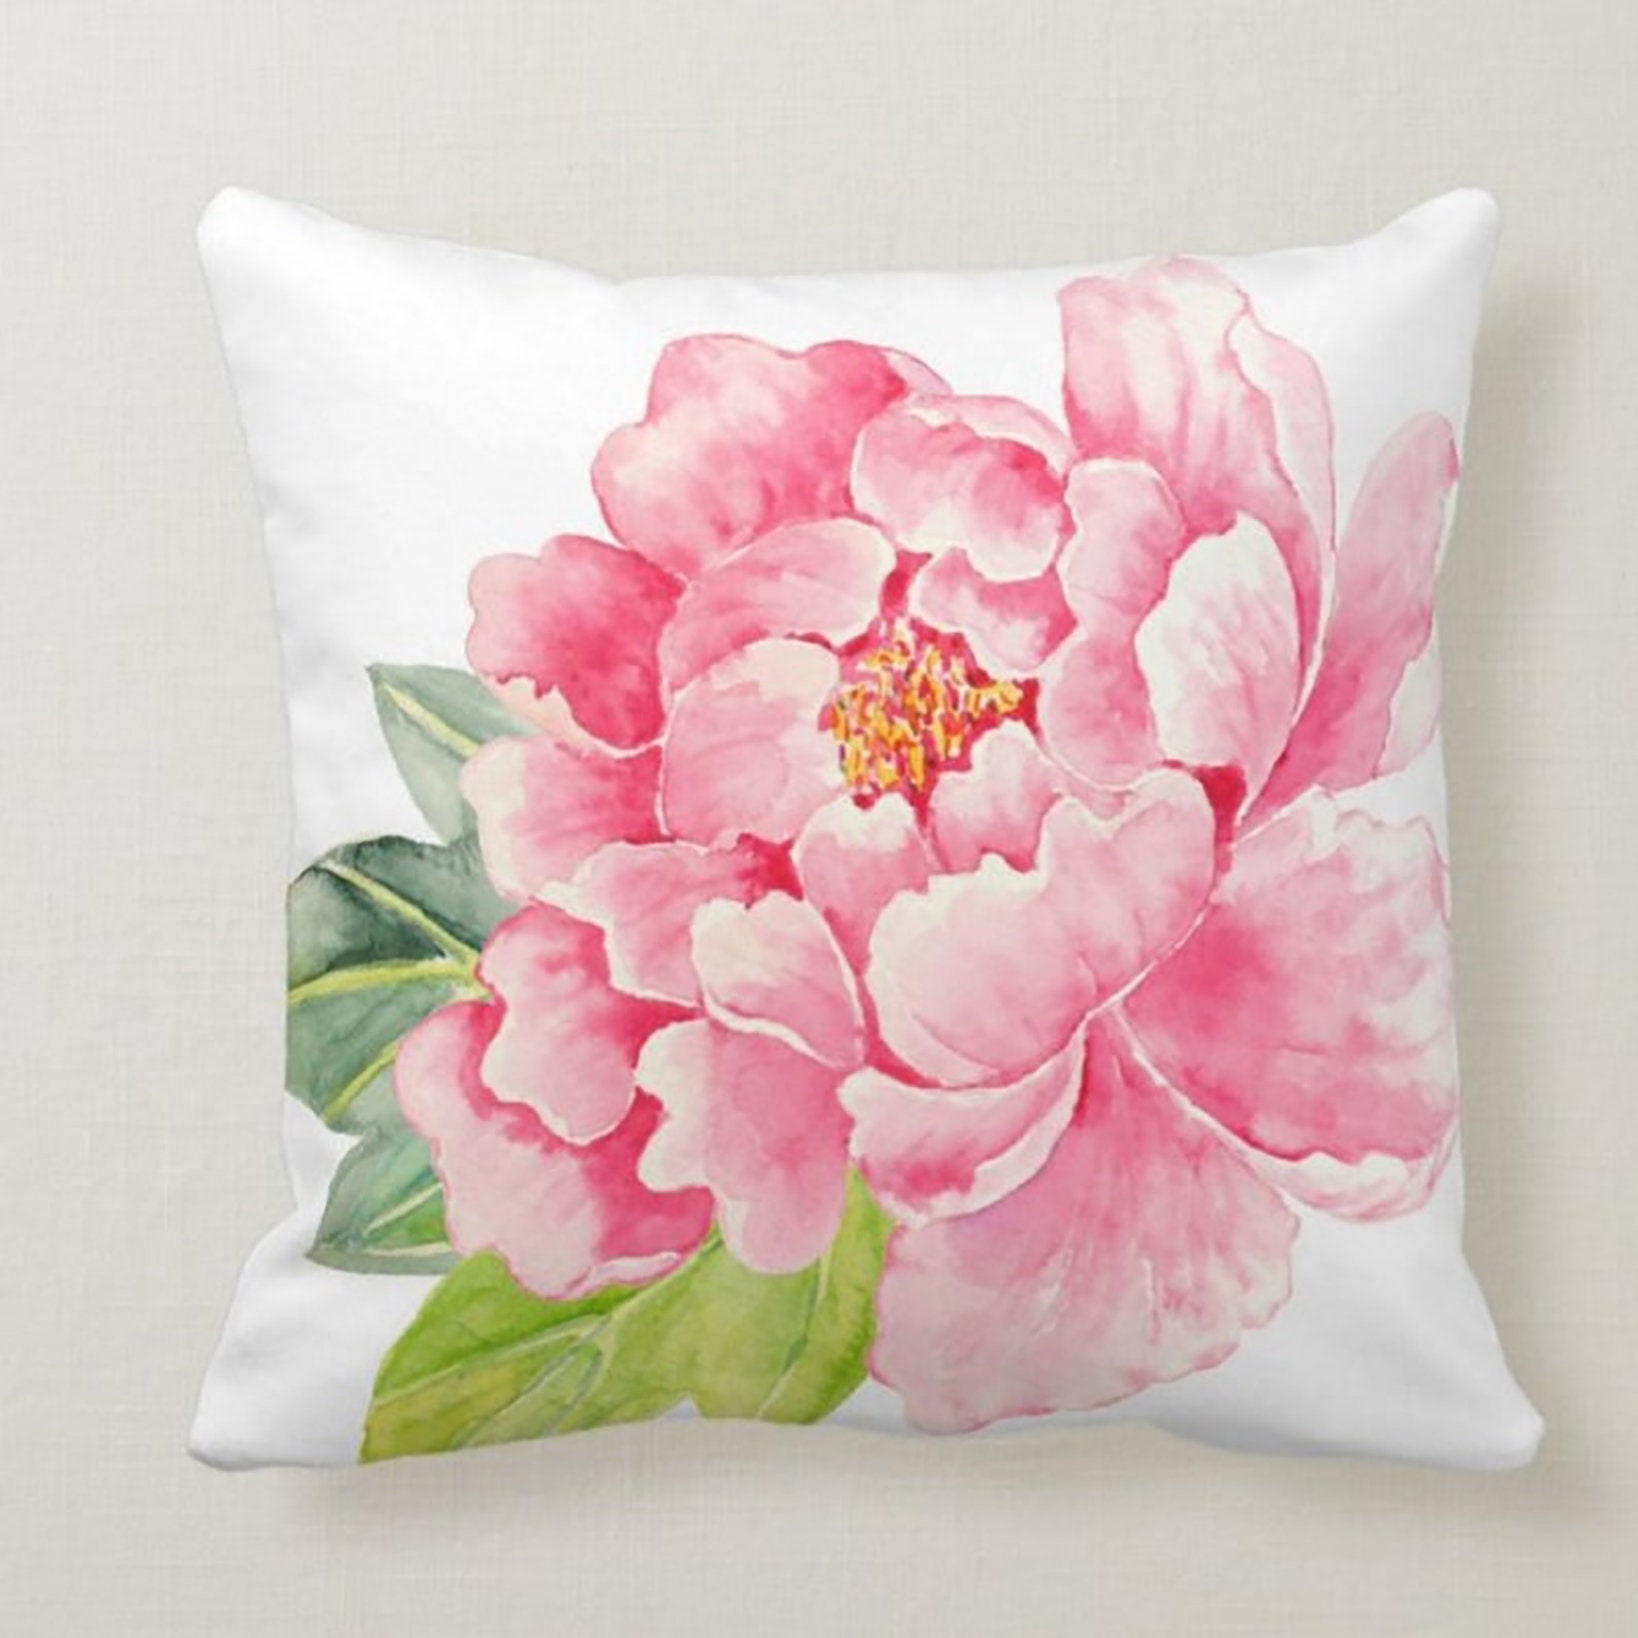 RT089532  18SQ FLORAL PILLOW W/EMBROIDERY WHITE/PINK/BLUE/YELLOW